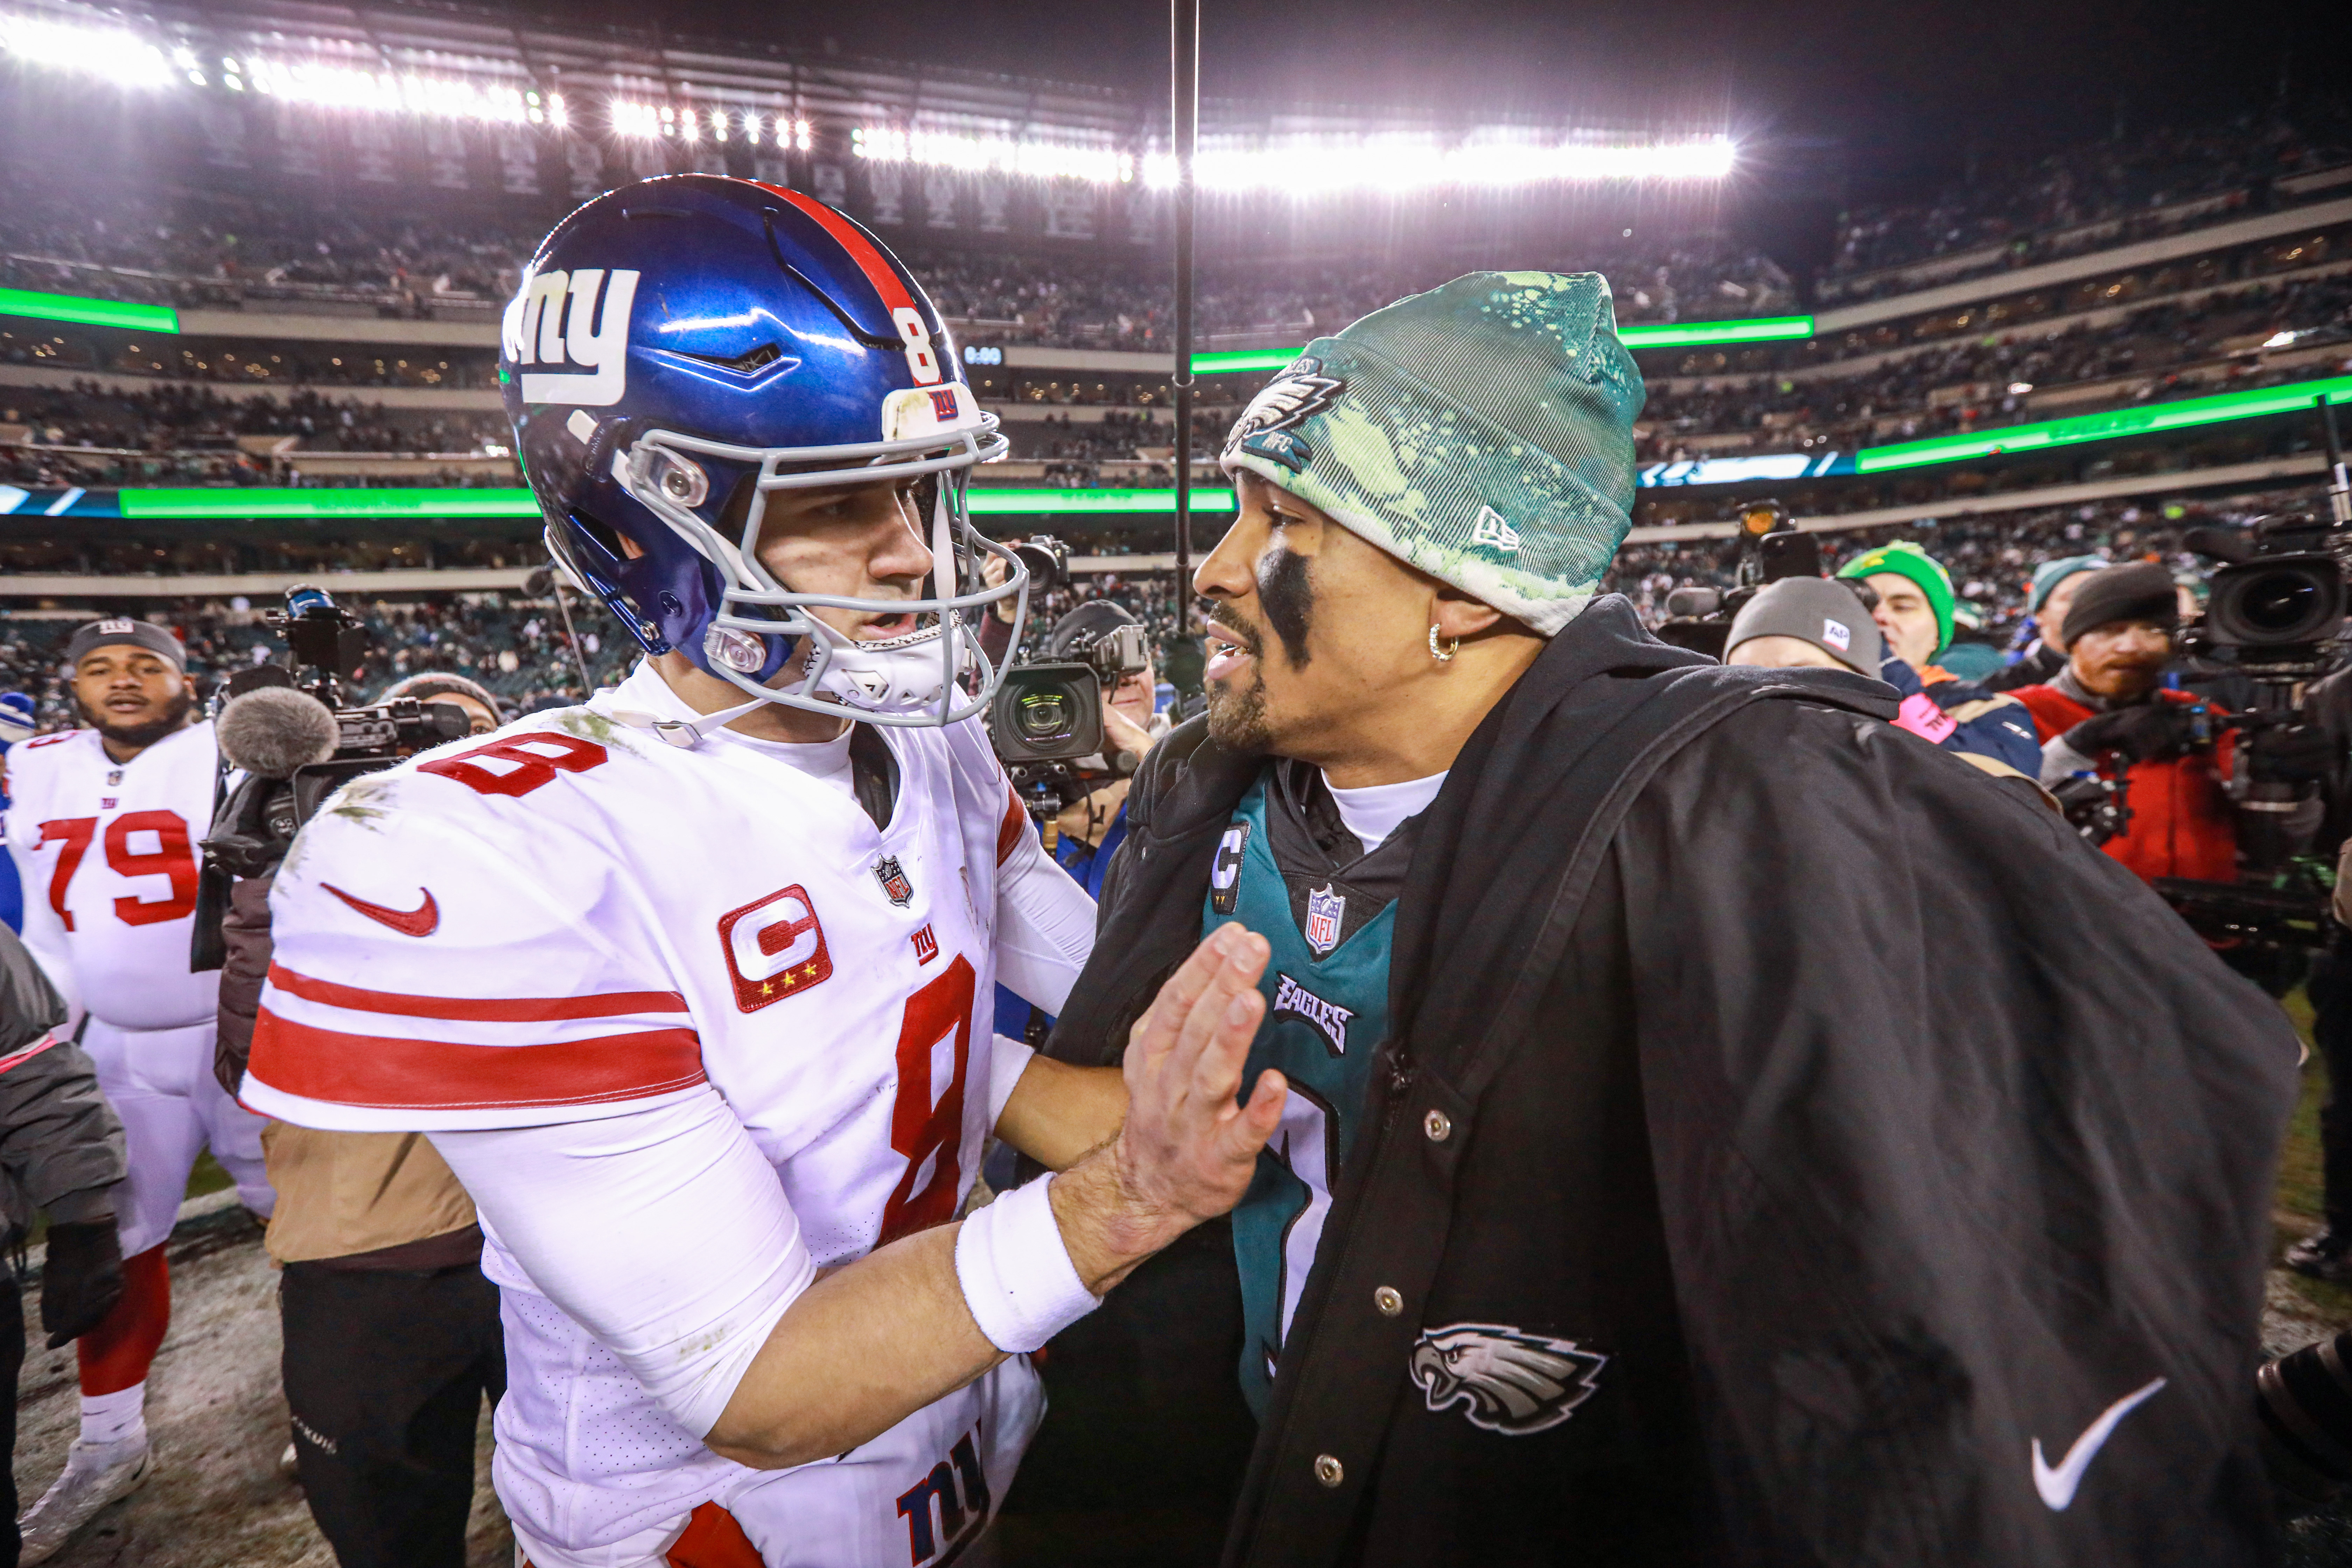 Giants fan's encounter with Eagles' Nick Sirianni is 'grossly